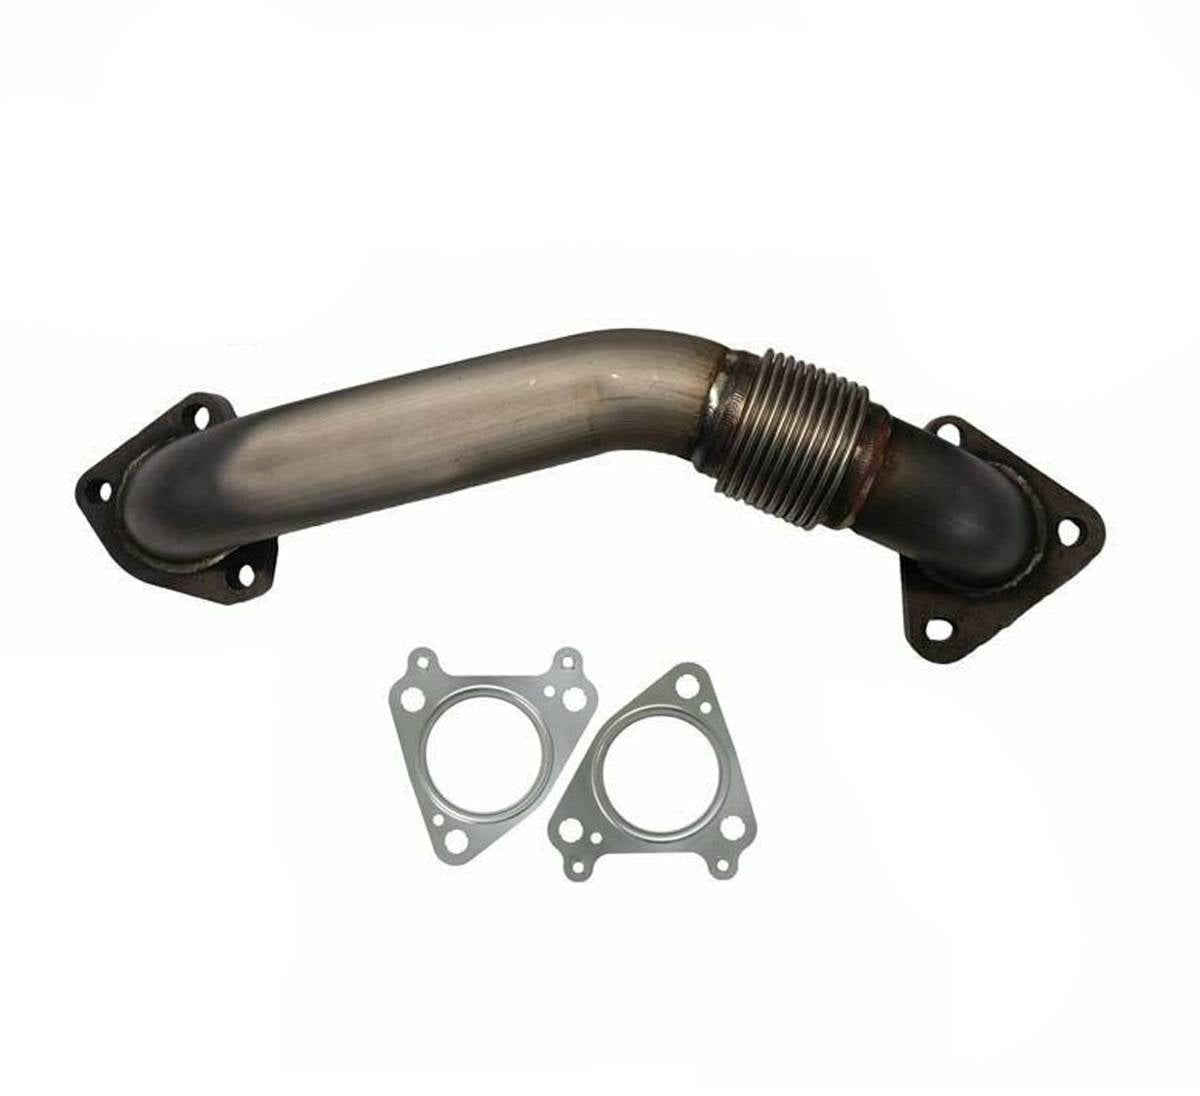 Image of Rudy's Bolt-On Replacement Passenger Side Up Pipe w/ Gaskets For 01-04 LB7 Duramax